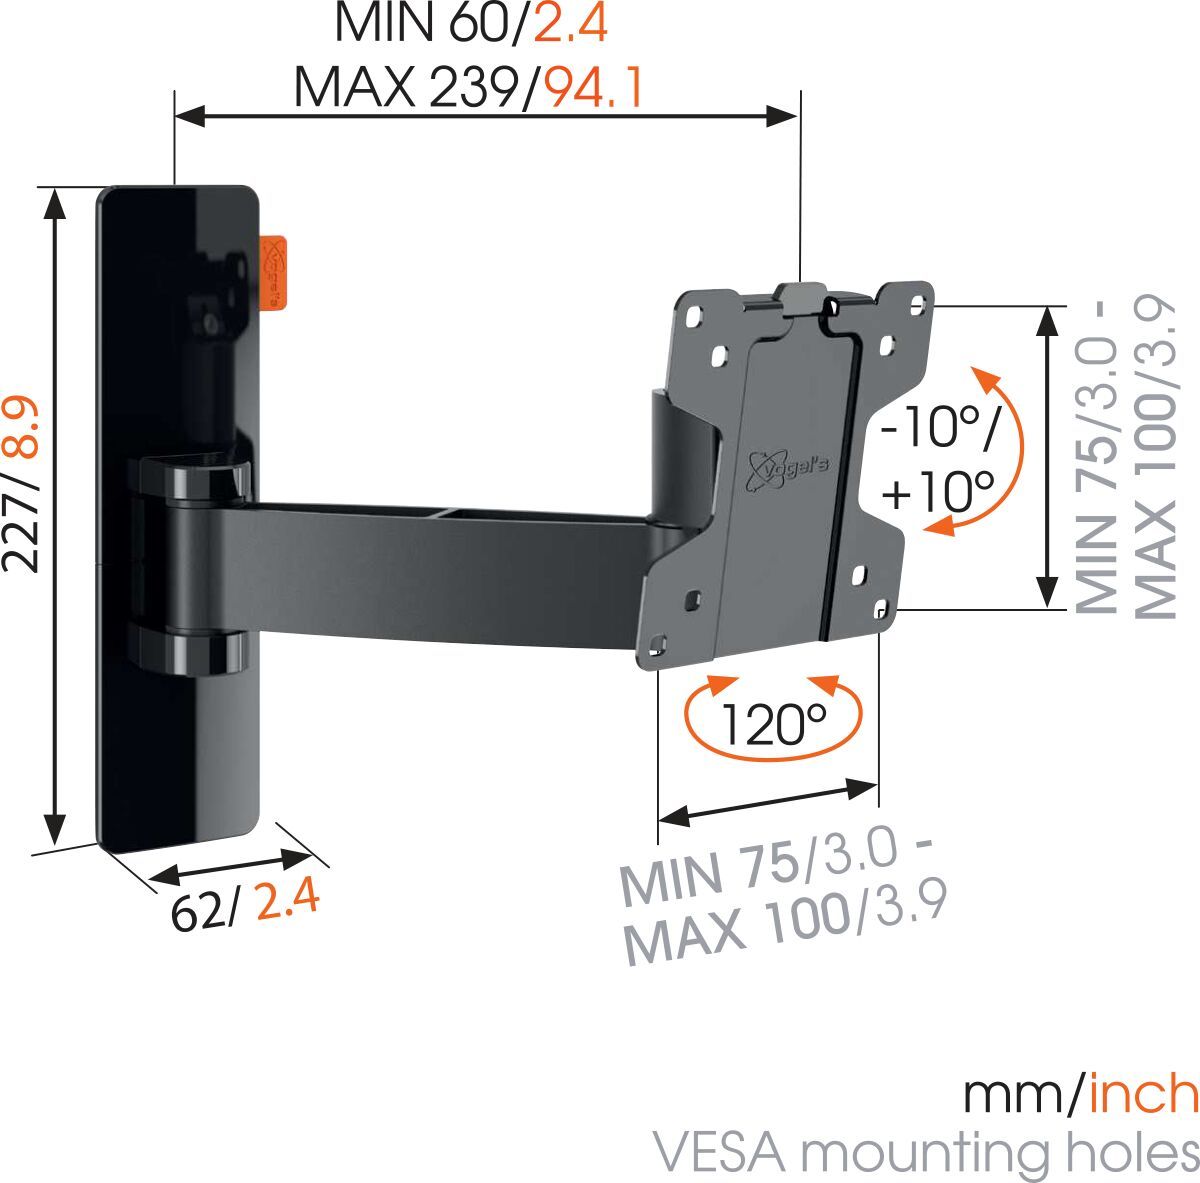 Vogel's WALL 2025 Full-Motion TV Wall Mount (black) - Suitable for 17 up to 26 inch TVs - Motion (up to 120°) - Tilt -10°/+10° - Dimensions